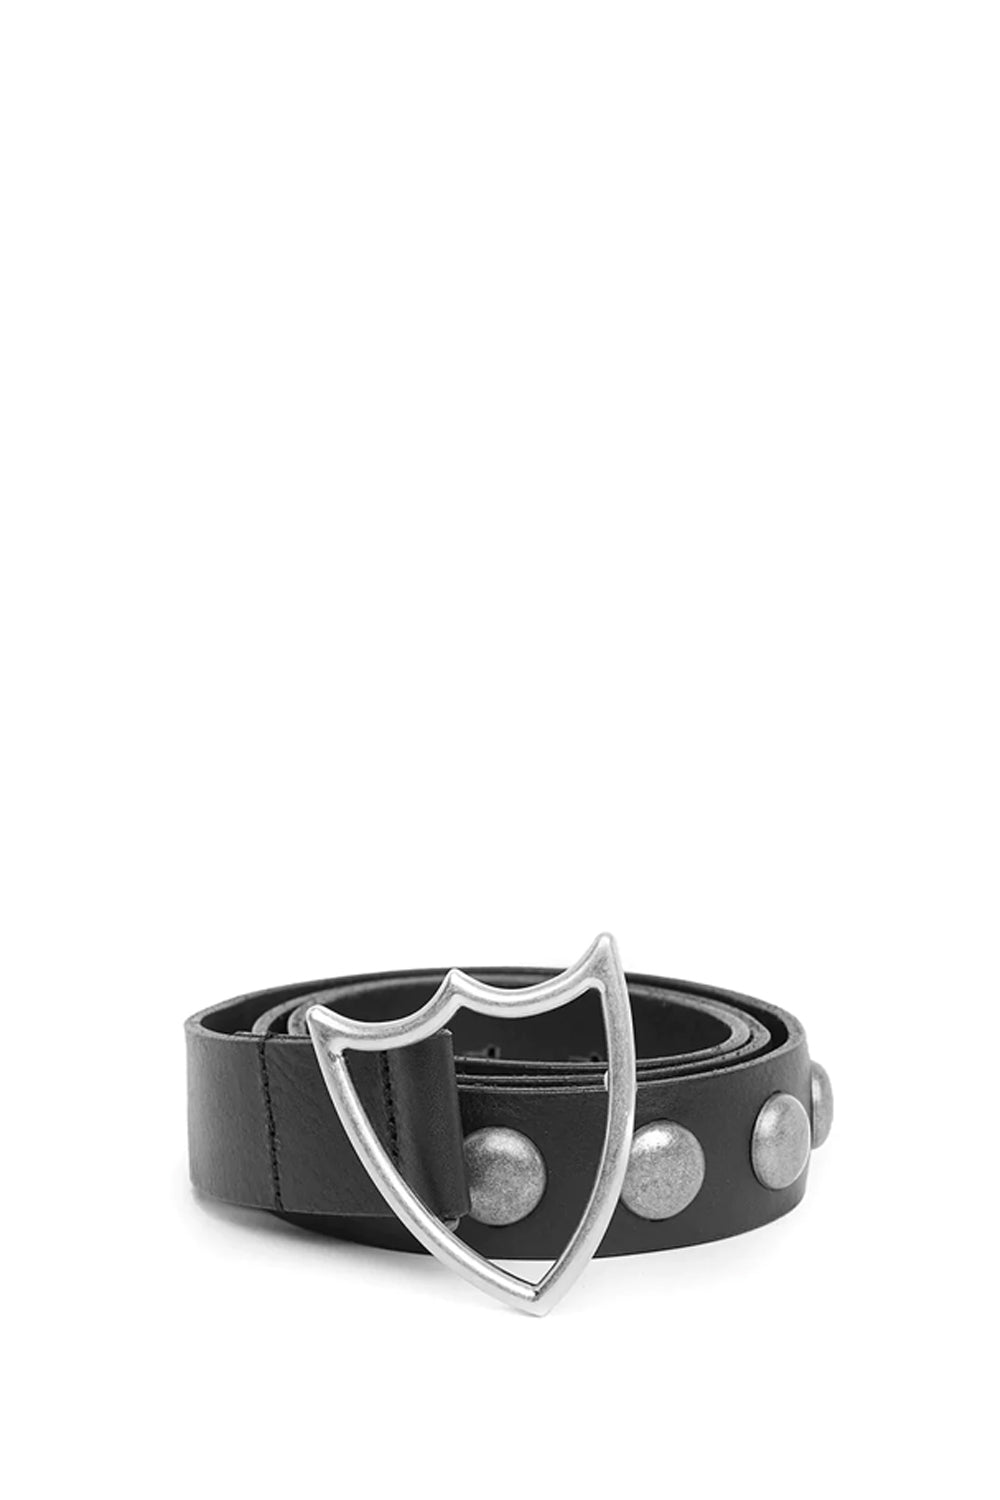 SHIELD STUDDED BELT Black leather belt with studs. Shield shaped buckle. 3,5 cm height. HTC LOS ANGELES